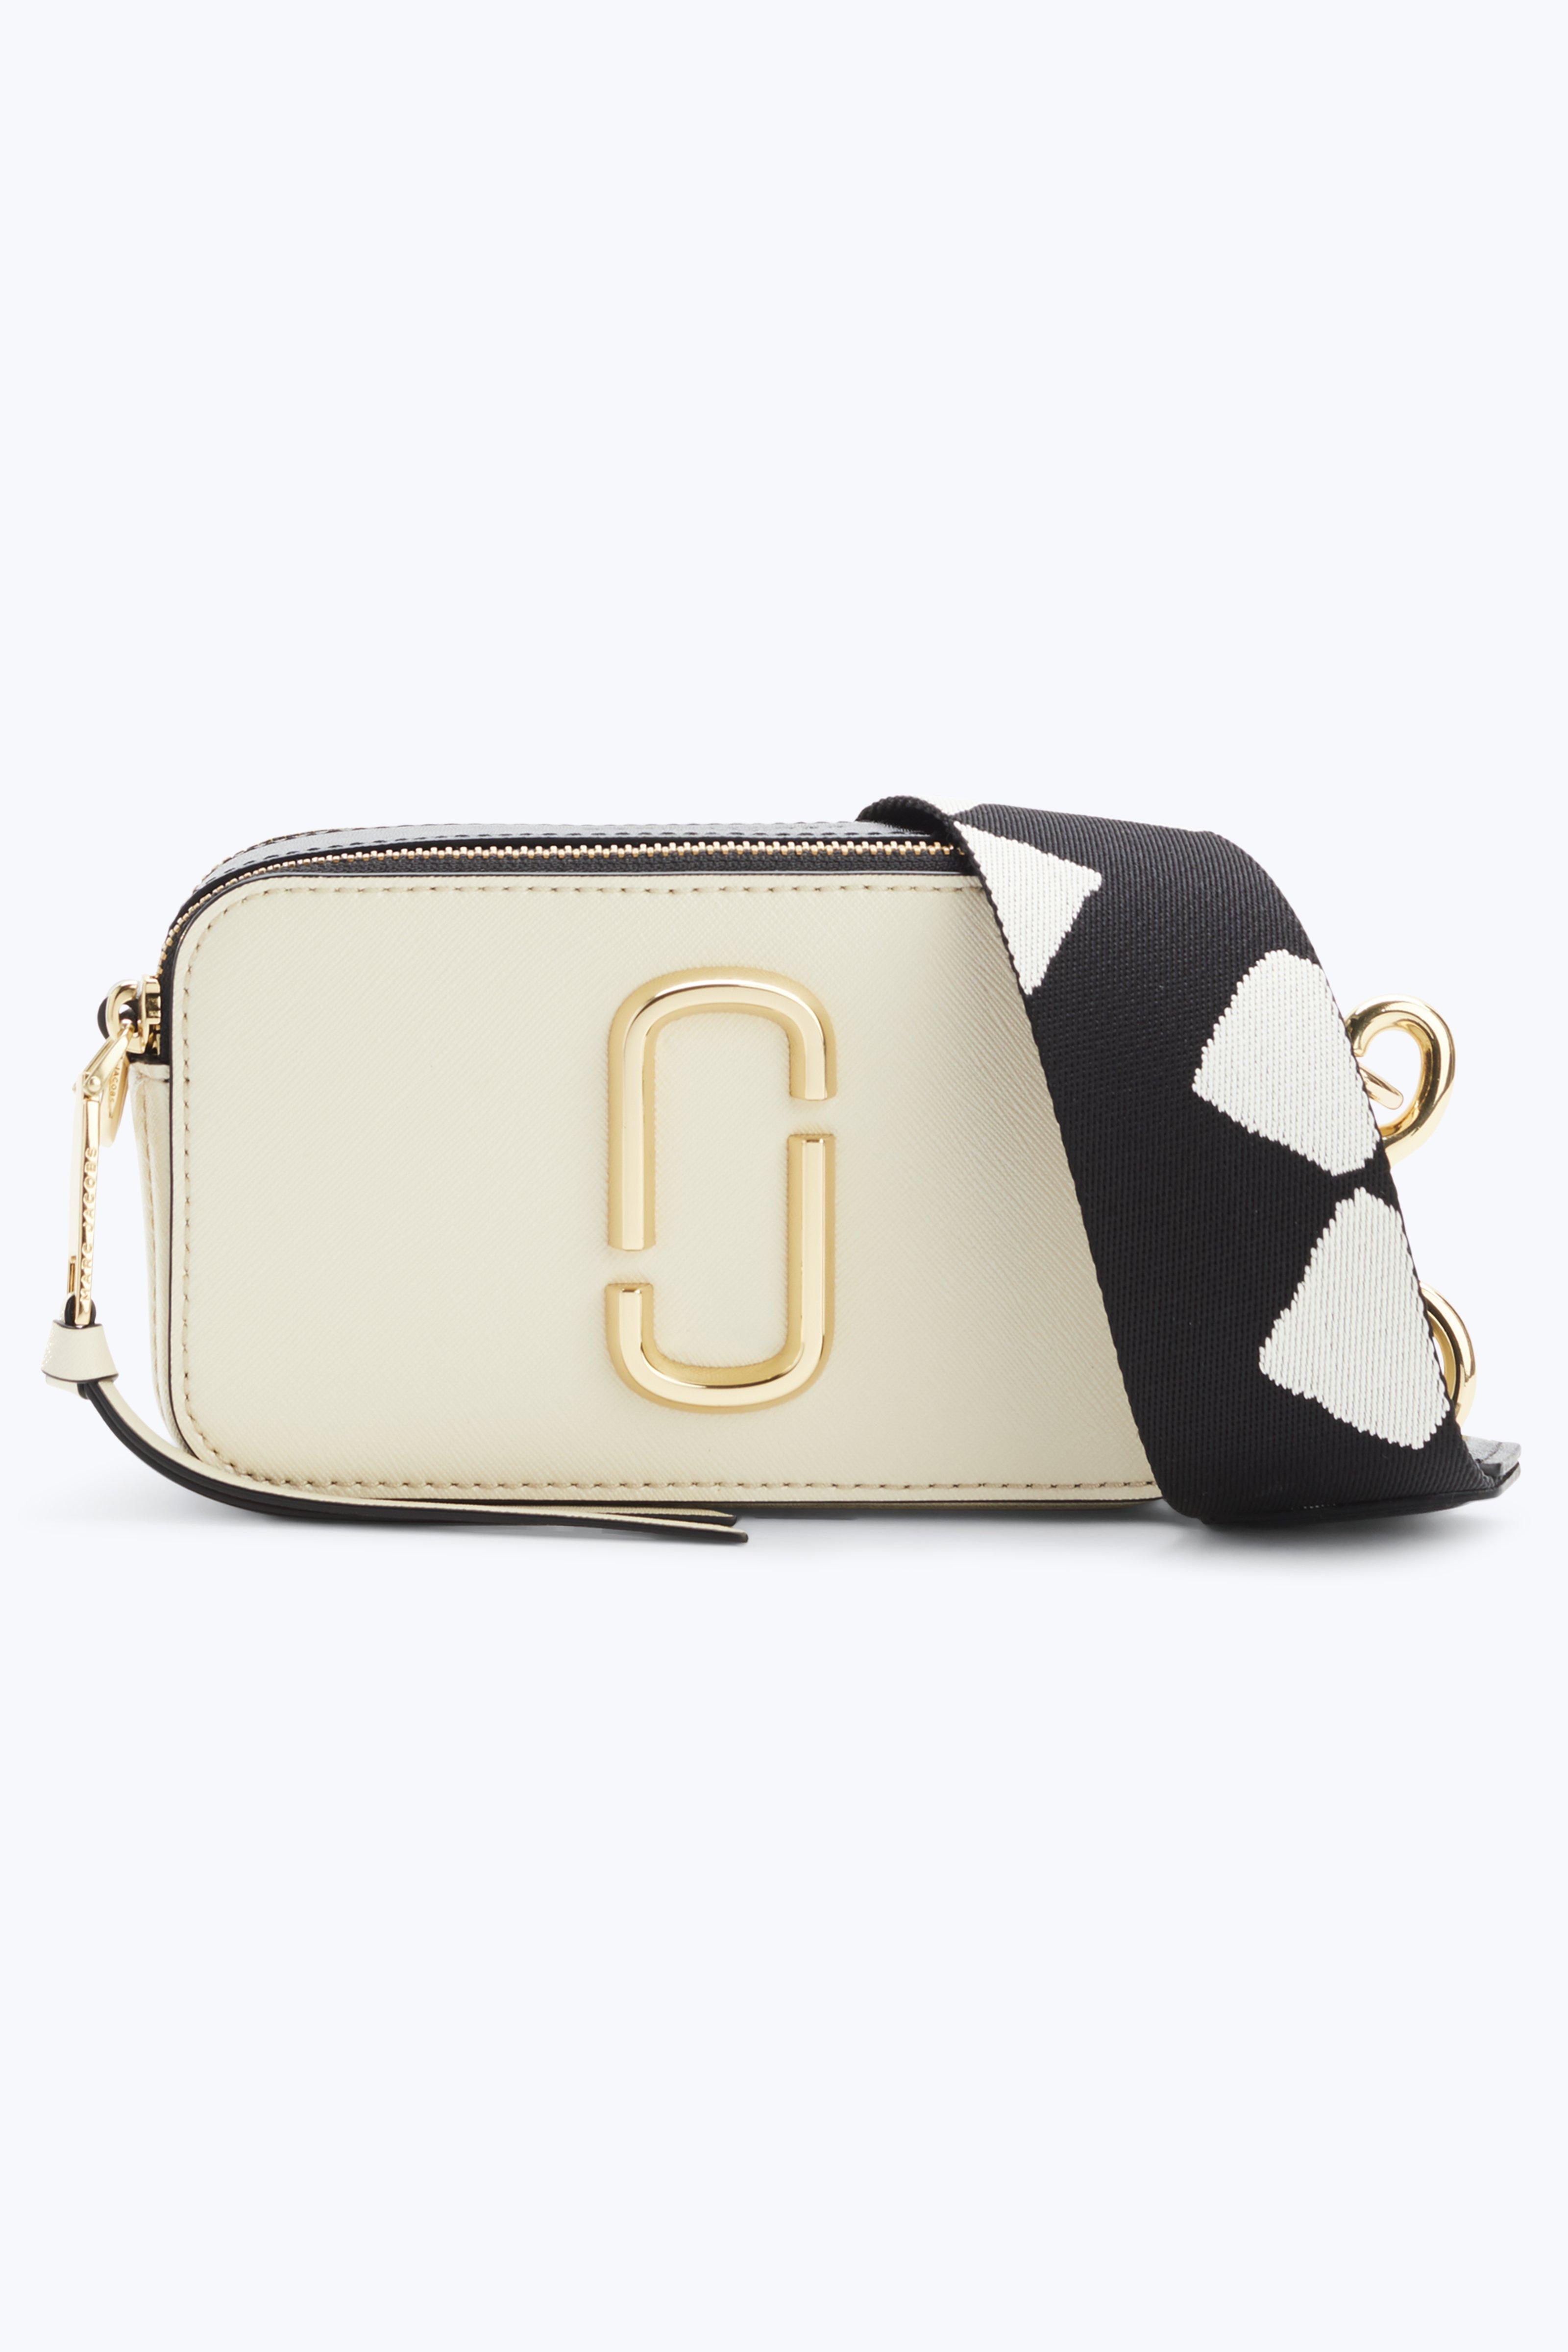 Marc Jacobs Snapshot Small Camera Bag In Cloud White Multi | ModeSens